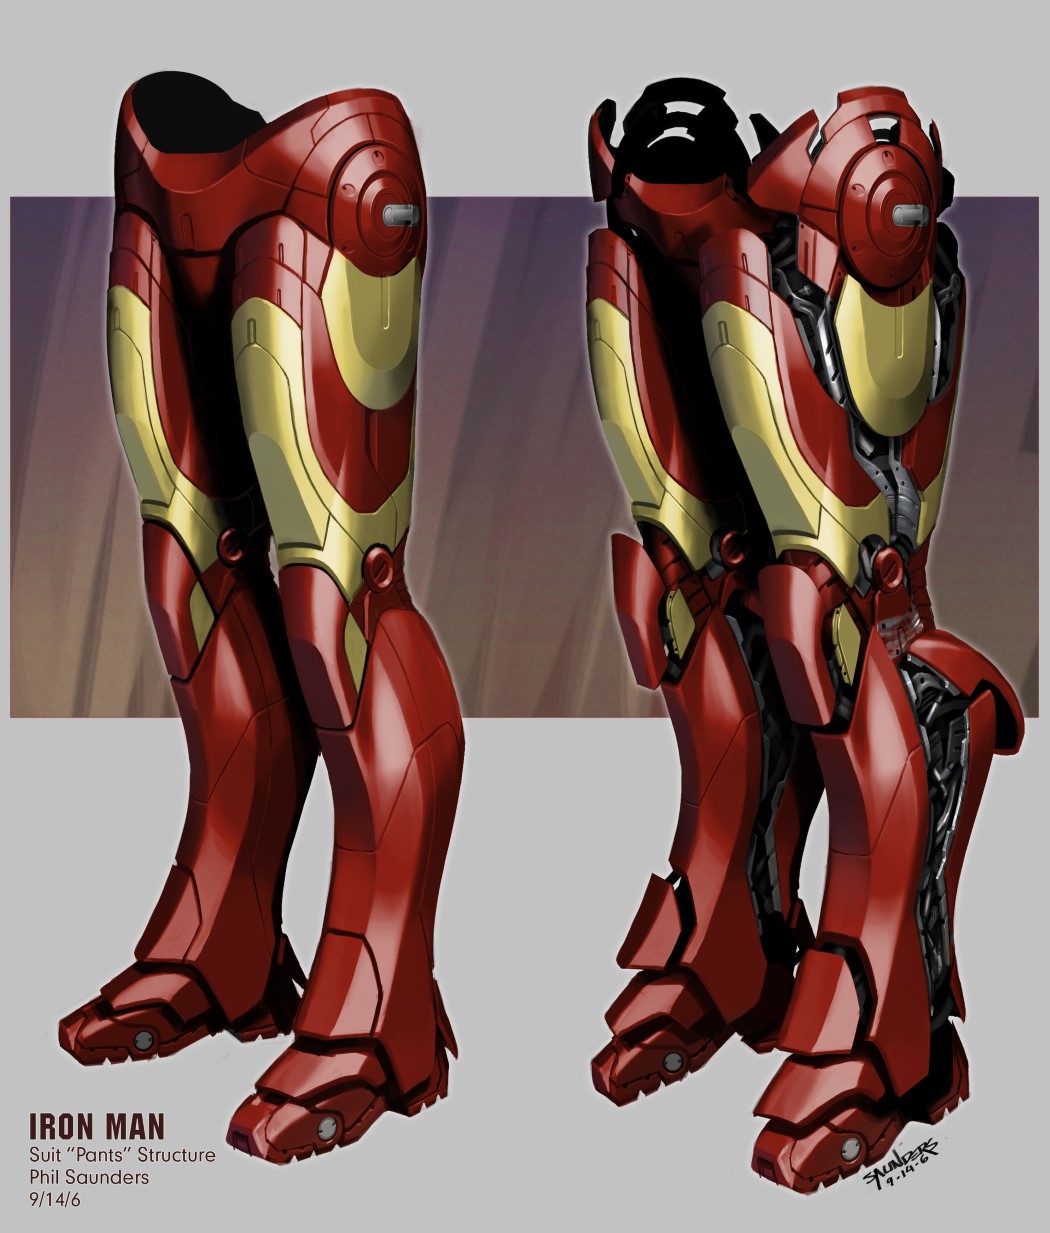 Phil Saunders, the concept designer behind the Iron Man ...